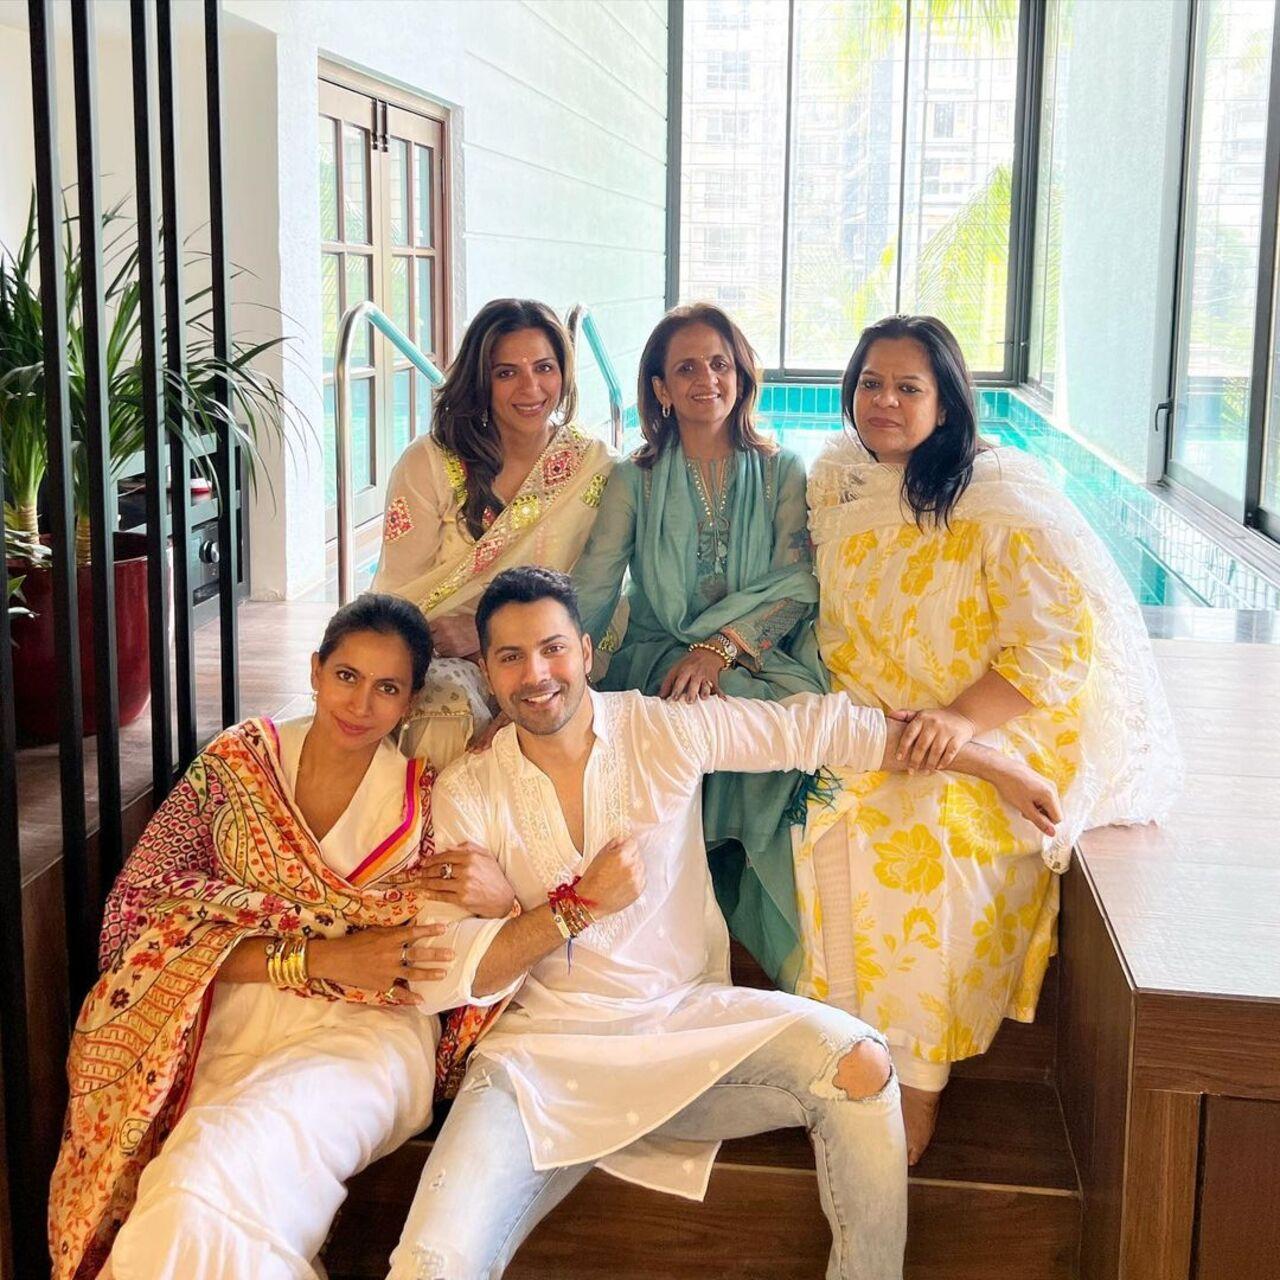 Varun Dhawan also celebrated the day with his sisters and shared a picture of him posing with them